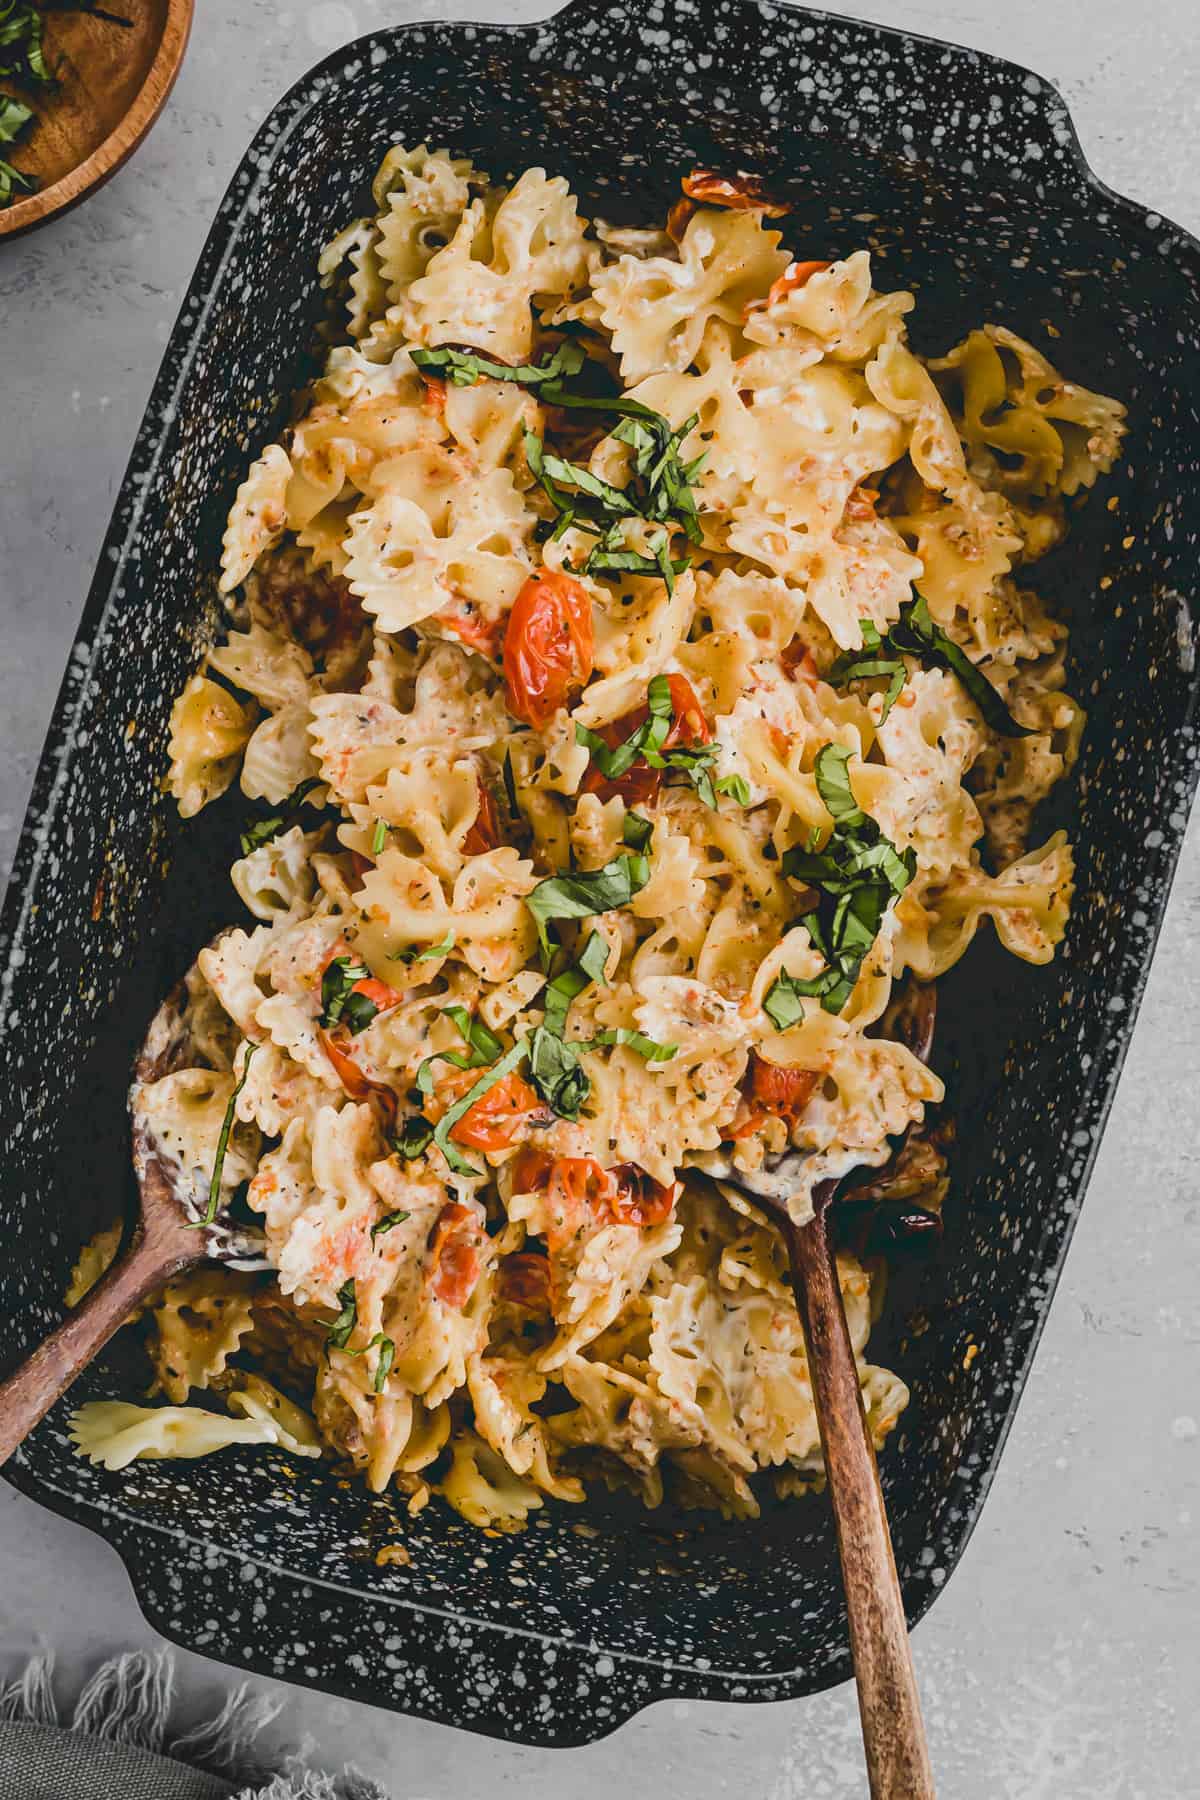 Baked Cream Cheese Pasta & Tomatoes in a Baking Dish